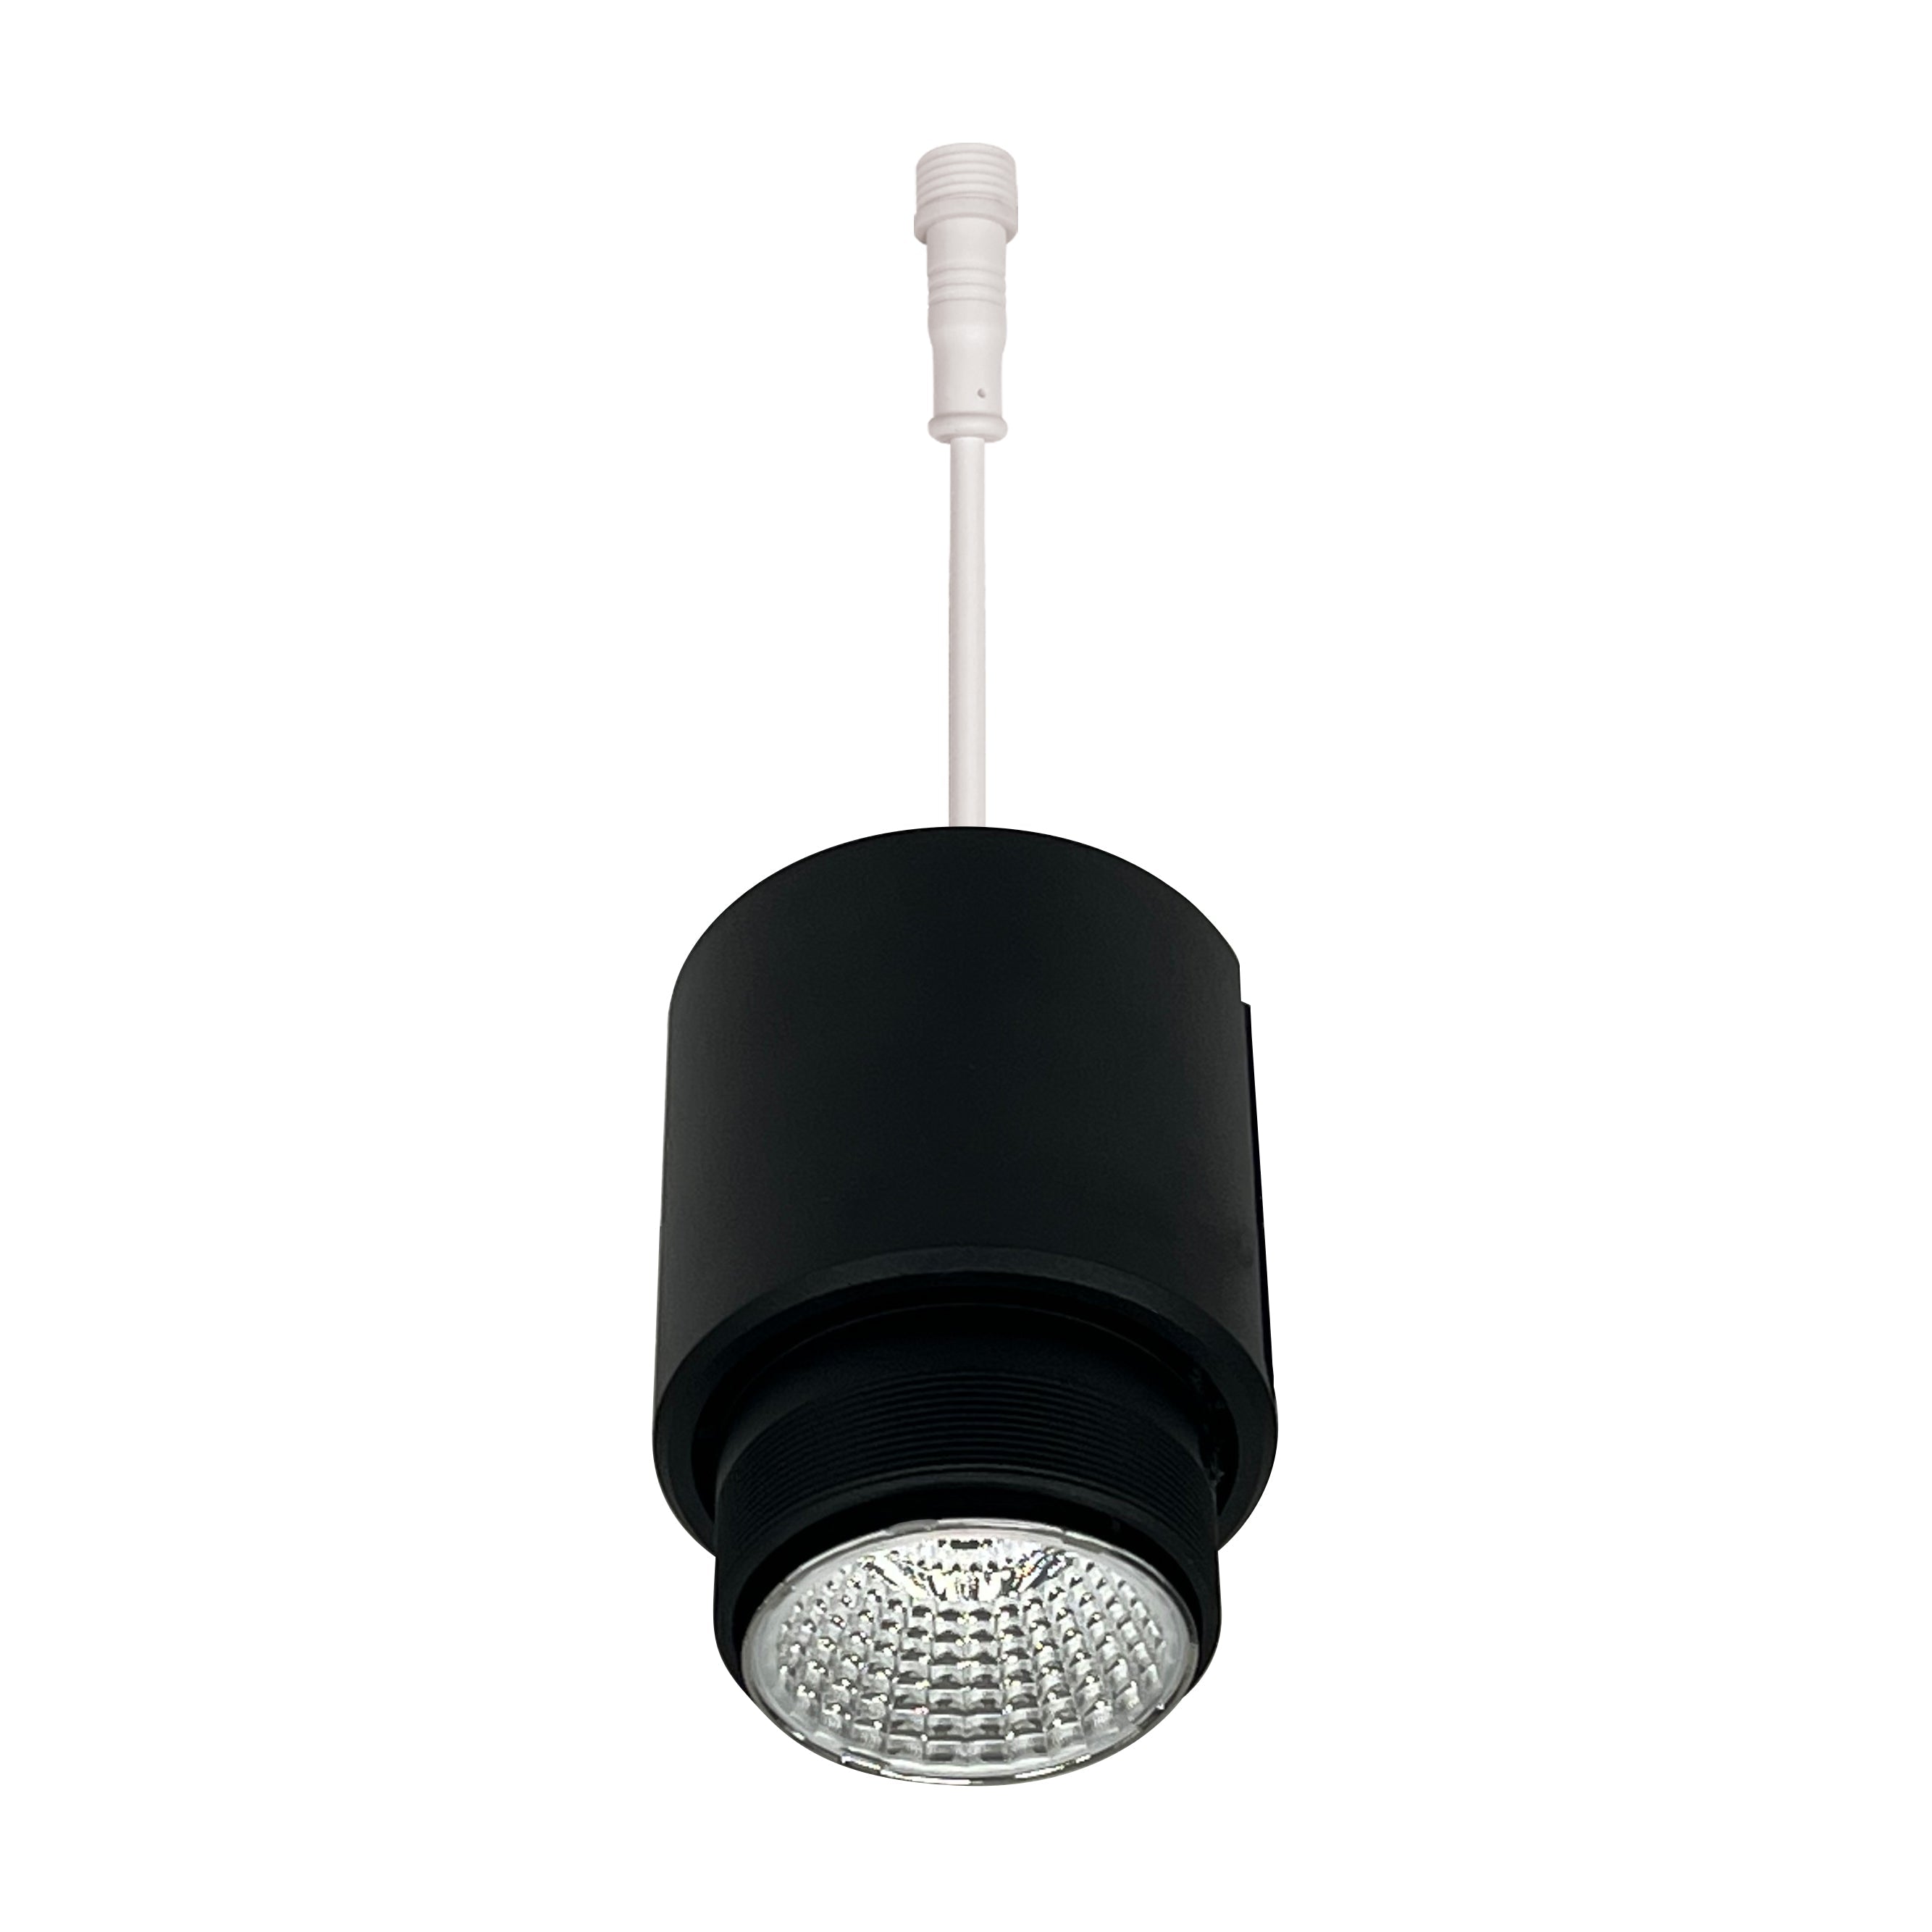 Nora Lighting NIOC-24LED927X - Recessed - 2 Inch & 4 Inch Iolite Can-less LED Module, 2700K